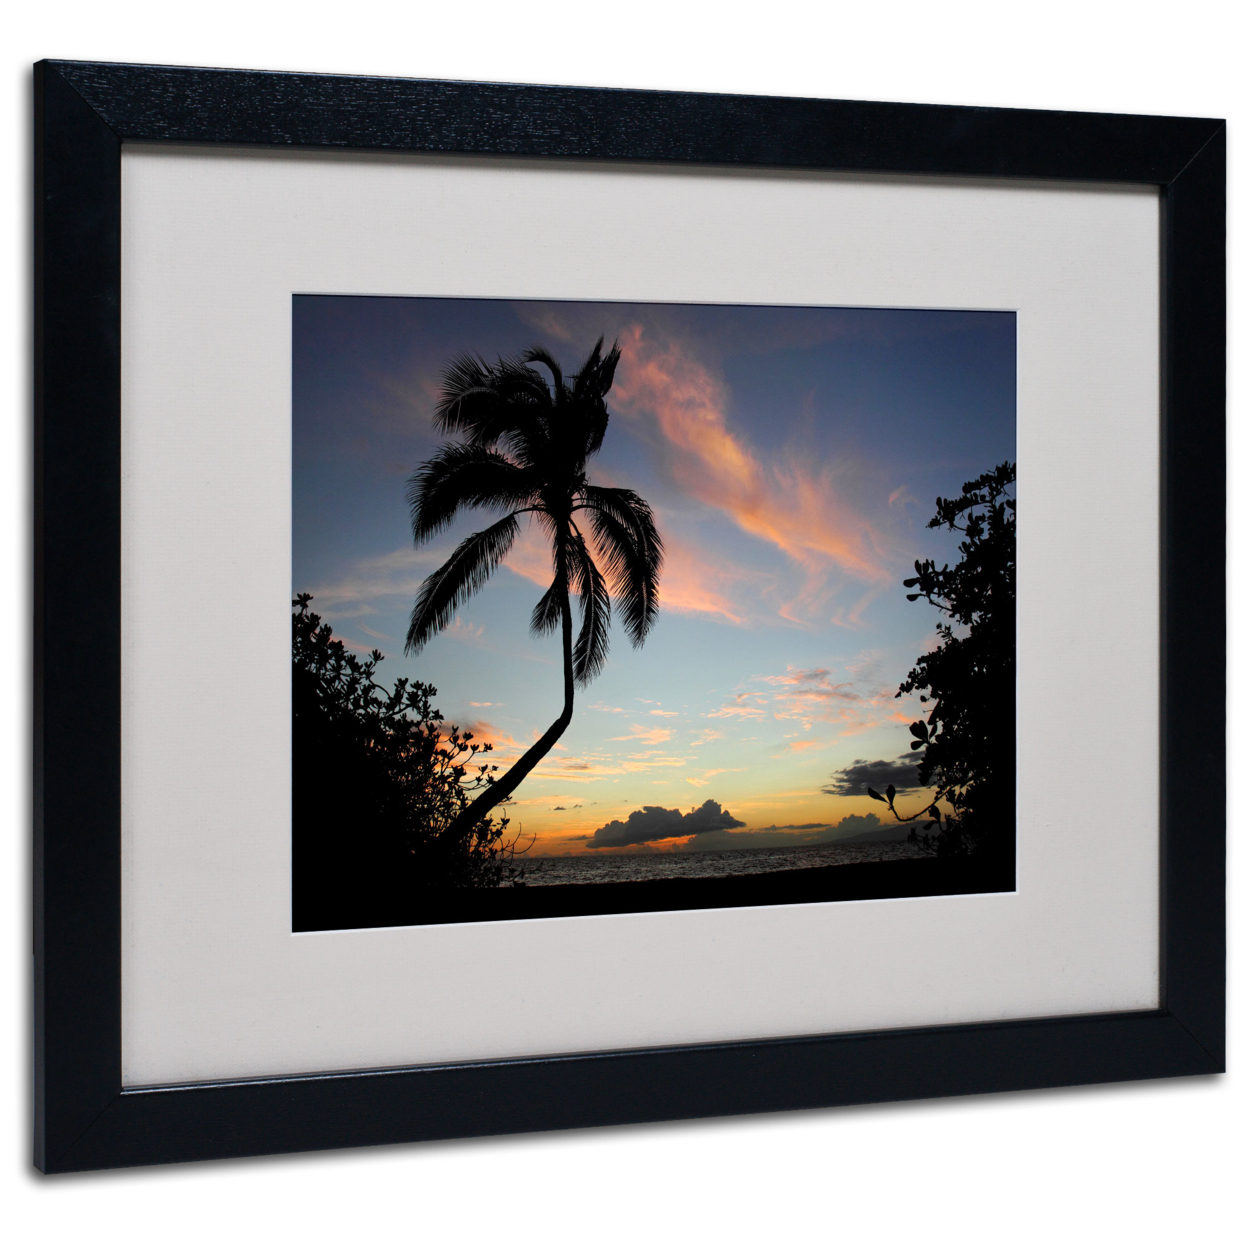 Pierre Leclerc 'Tropical Sunset' Black Wooden Framed Art 18 X 22 Inches